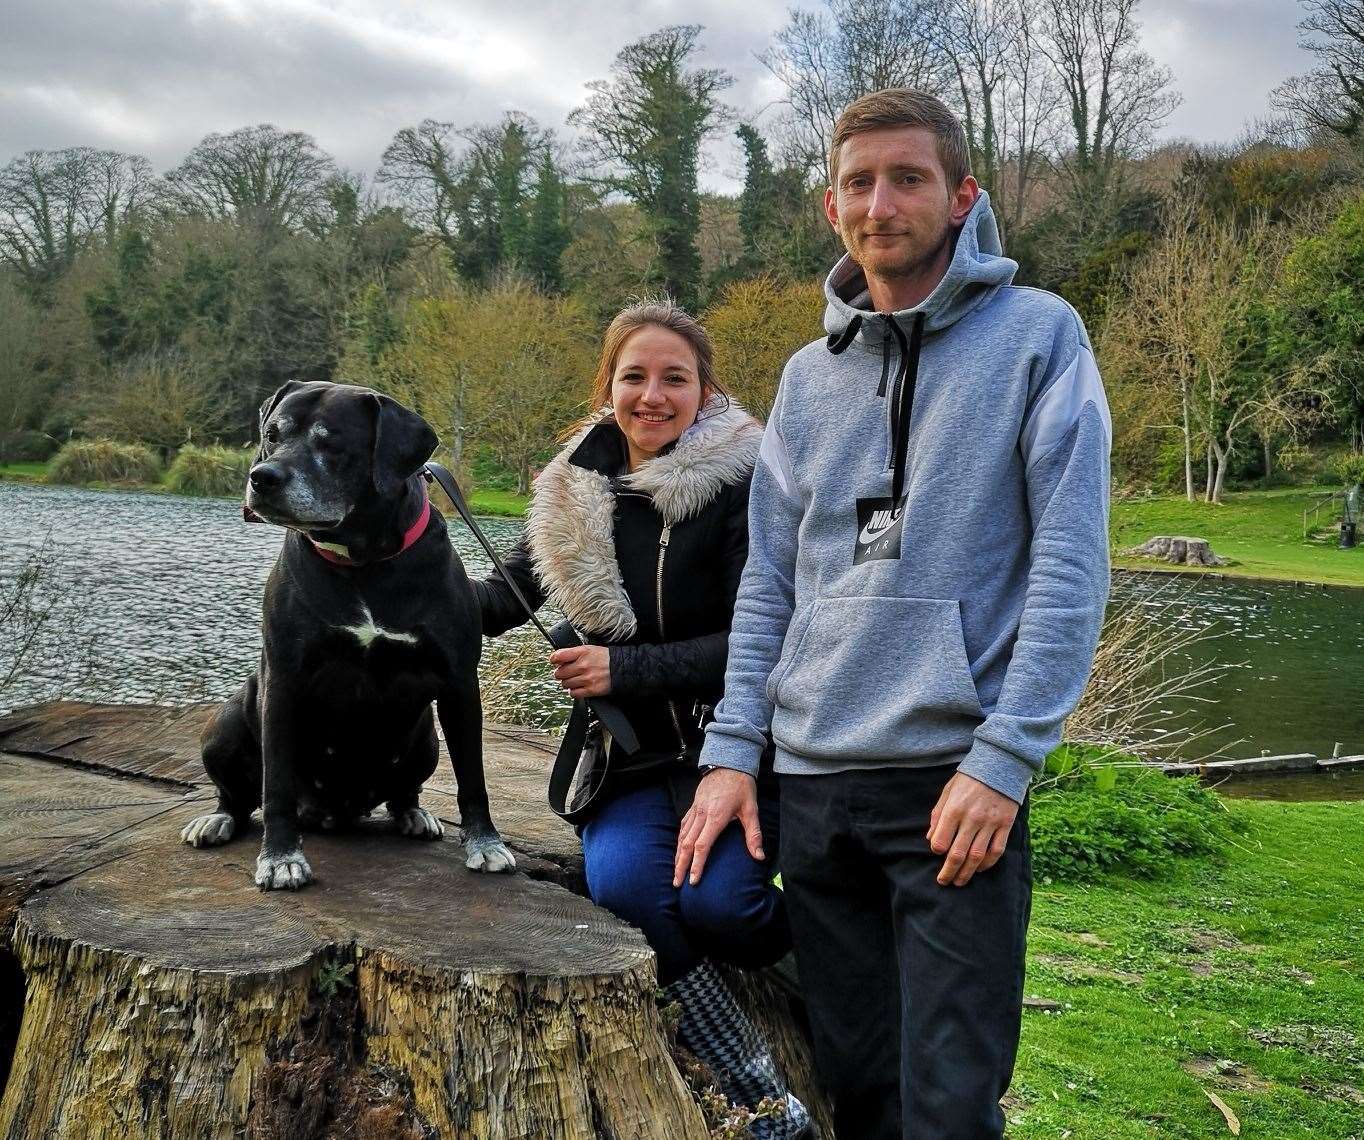 Dayle with partner Amber Donegan and their dog Bobo